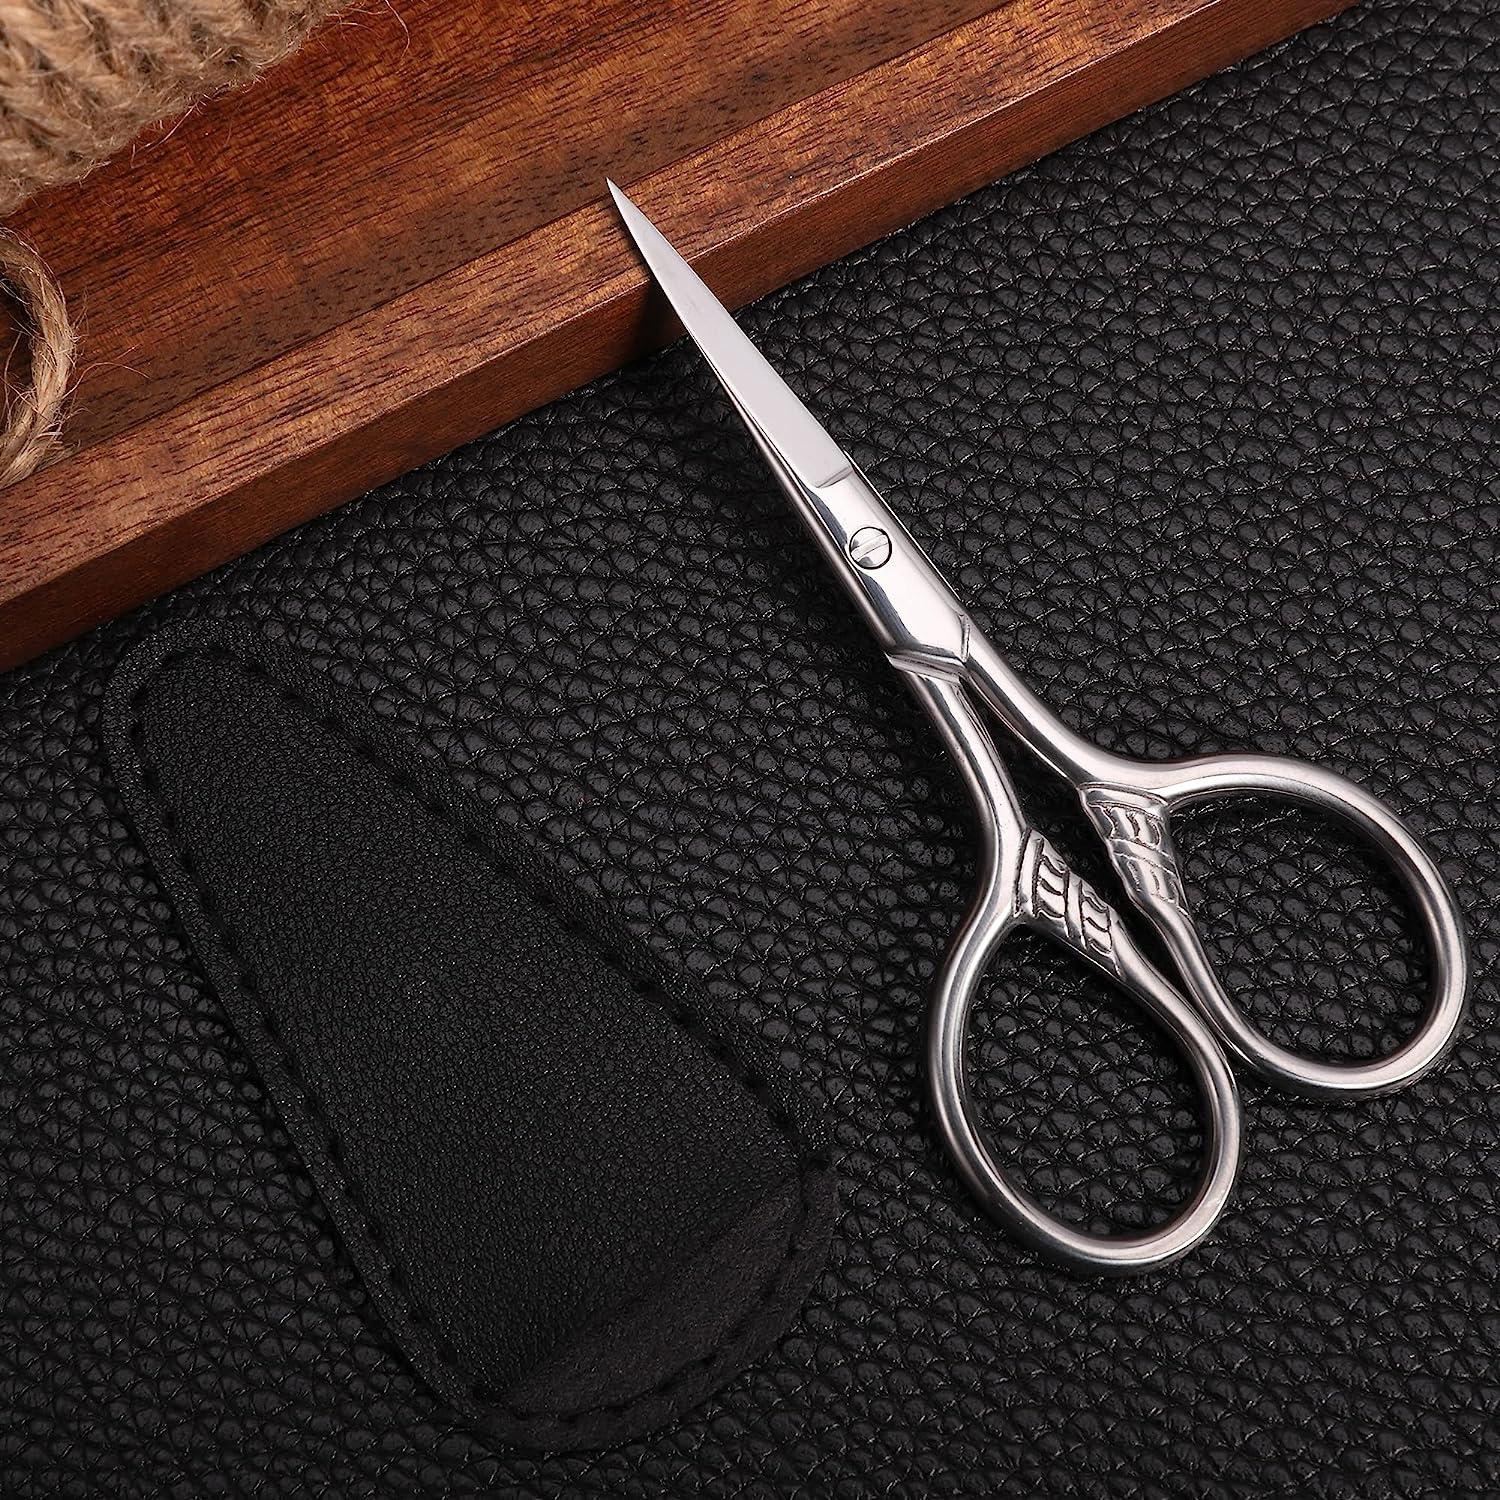 3.5 Inches Embroidery Scissors Stainless Steel Small Sewing